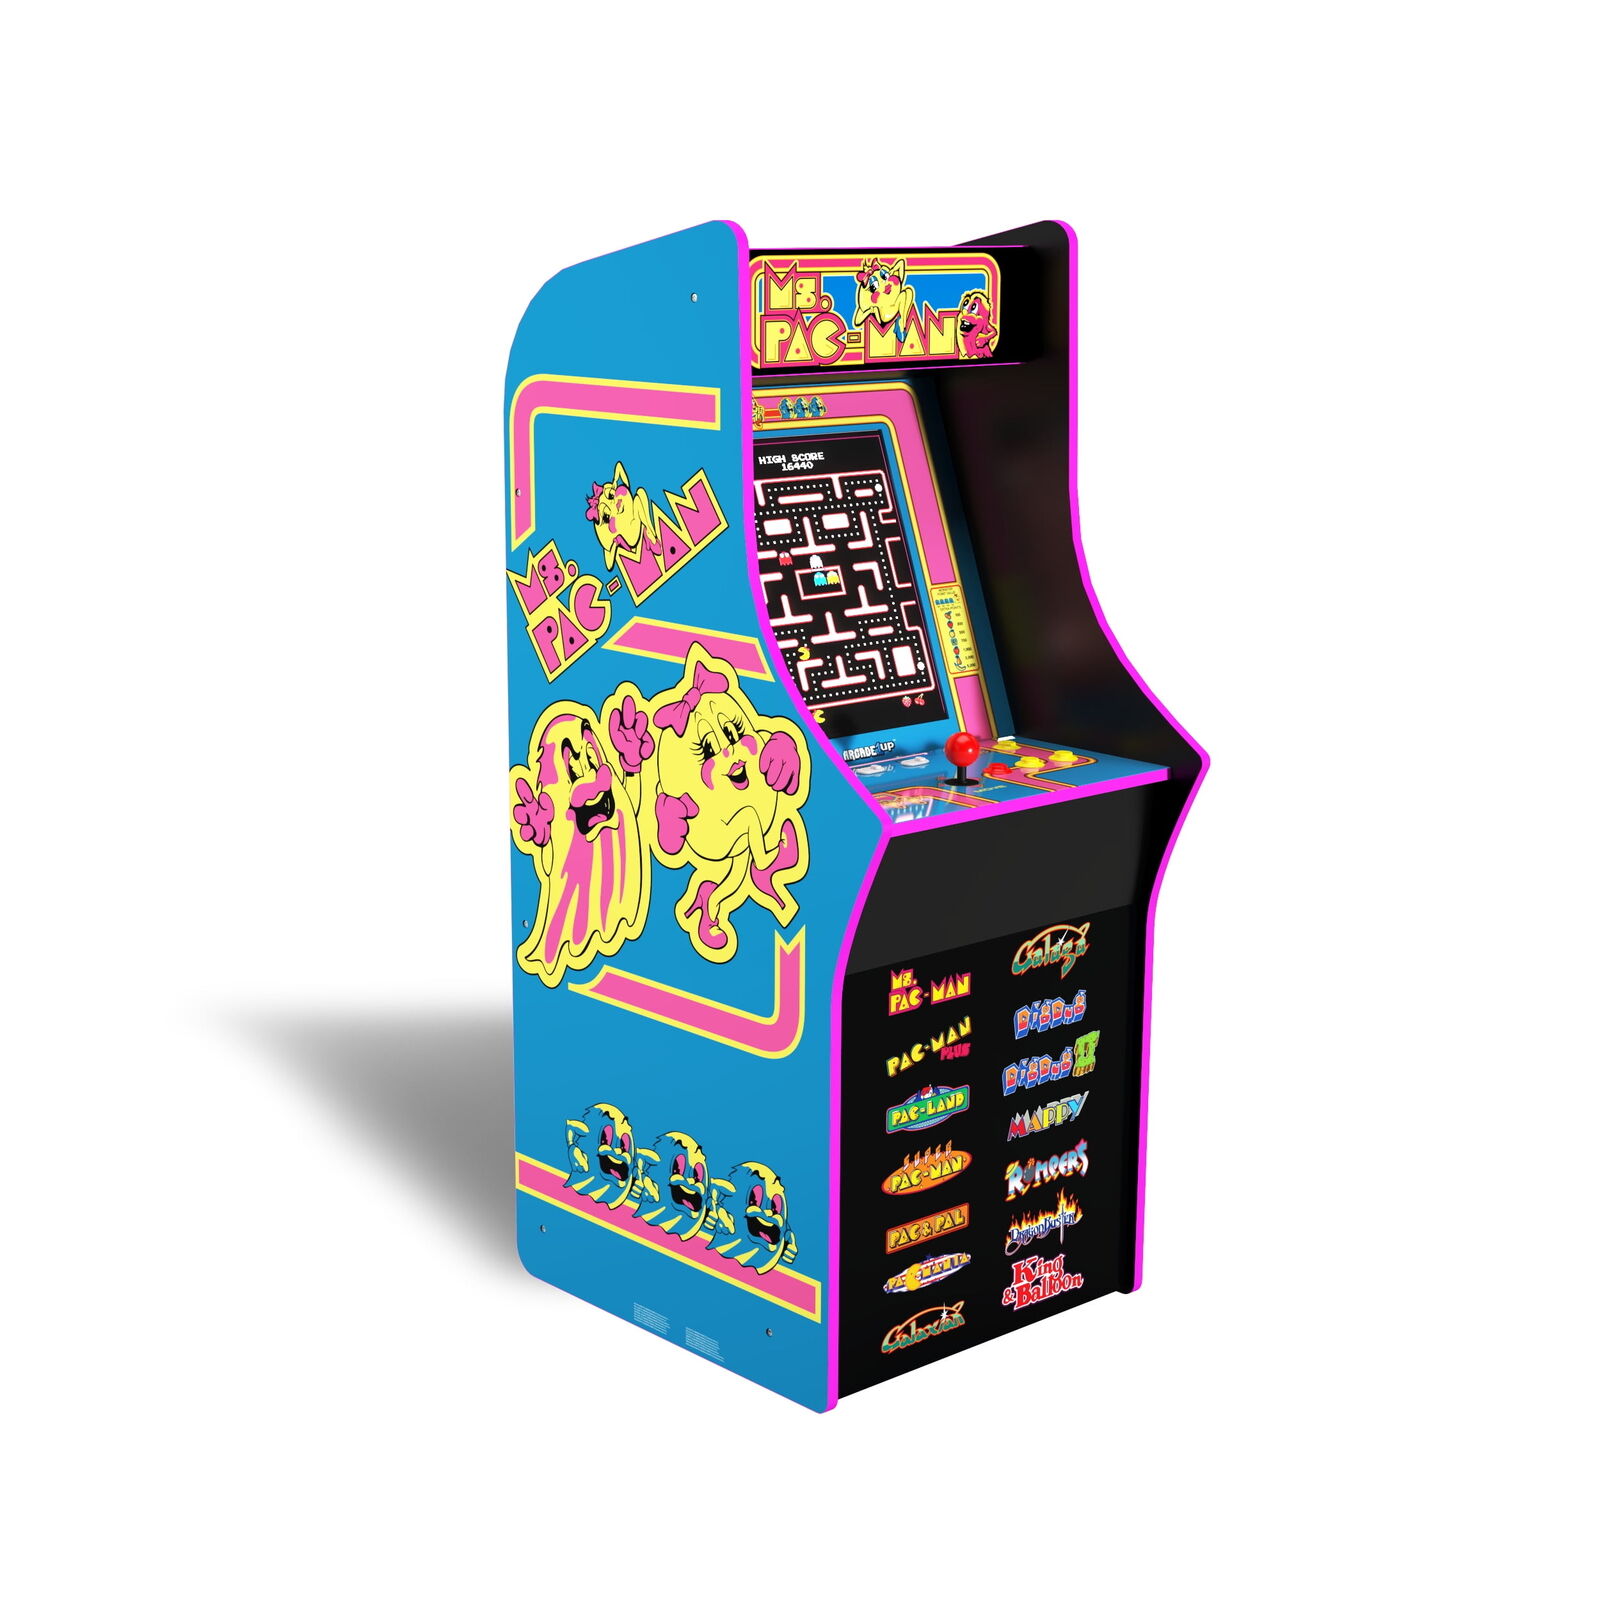 Arcade1Up Ms. PAC-MAN Classic Arcade Game, built for your home, 4-foot-tall stan